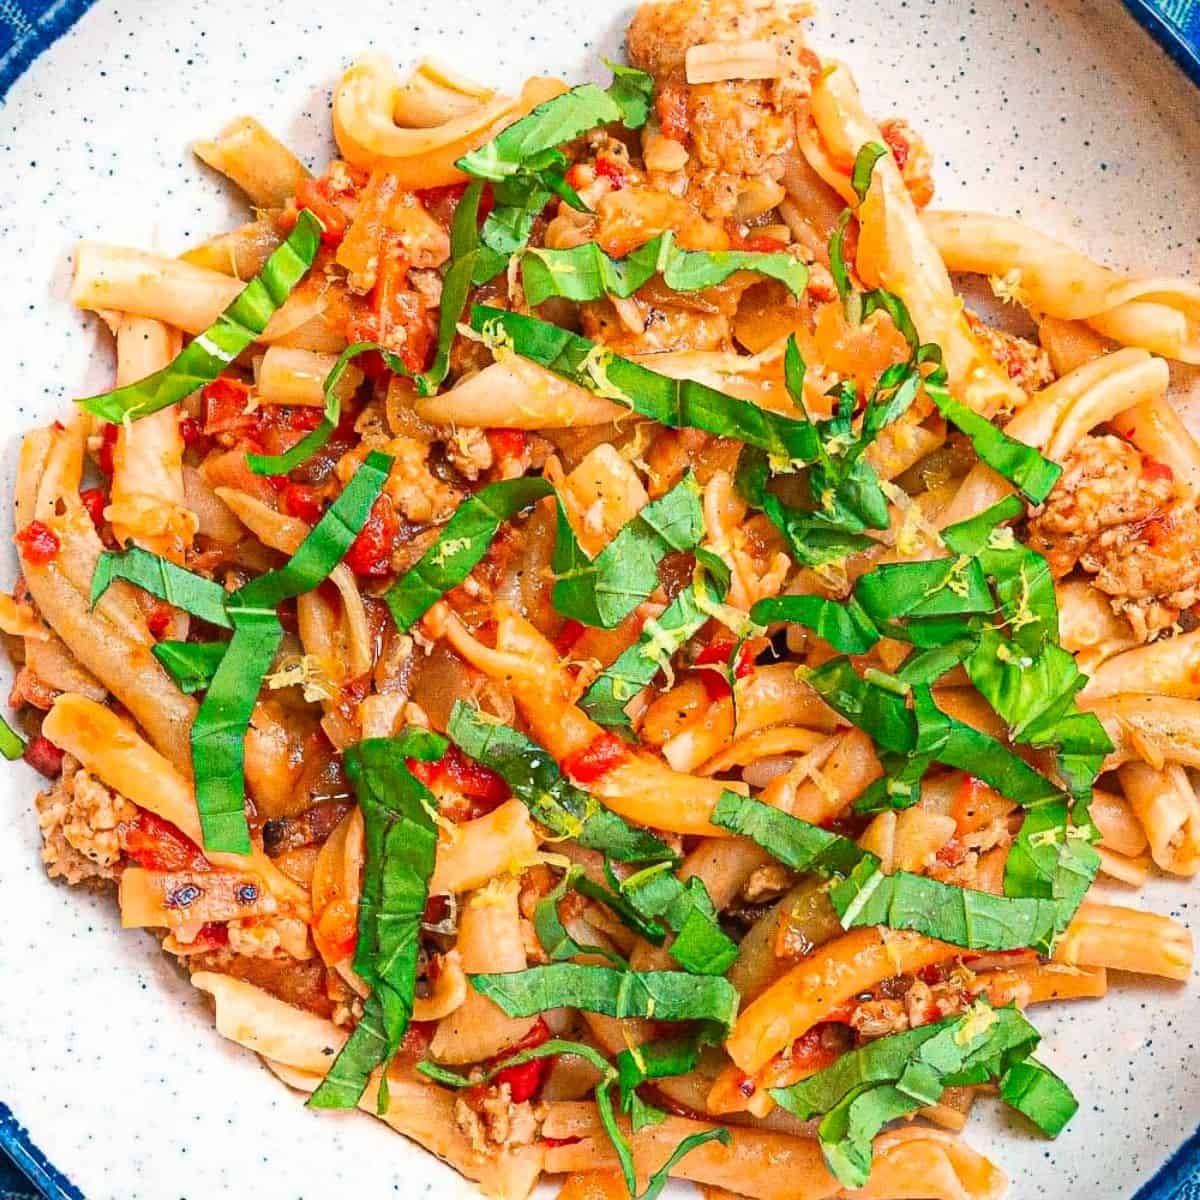 9. Pasta with Italian Sausage and Roasted Red Peppers - recipe for Italian Sausage with pasta